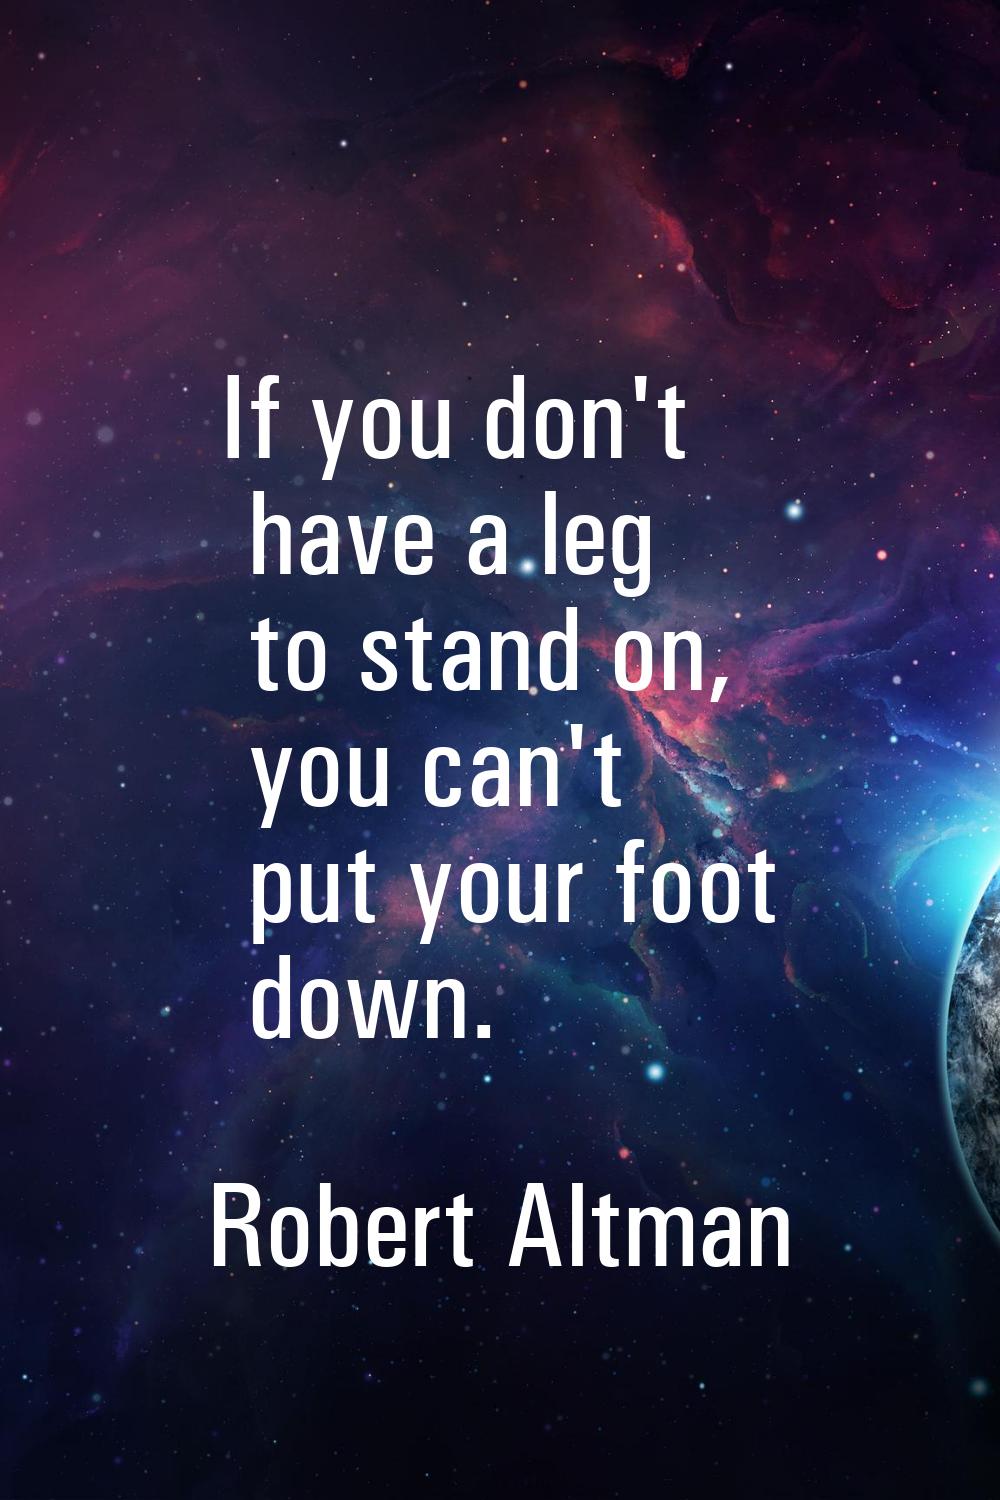 If you don't have a leg to stand on, you can't put your foot down.